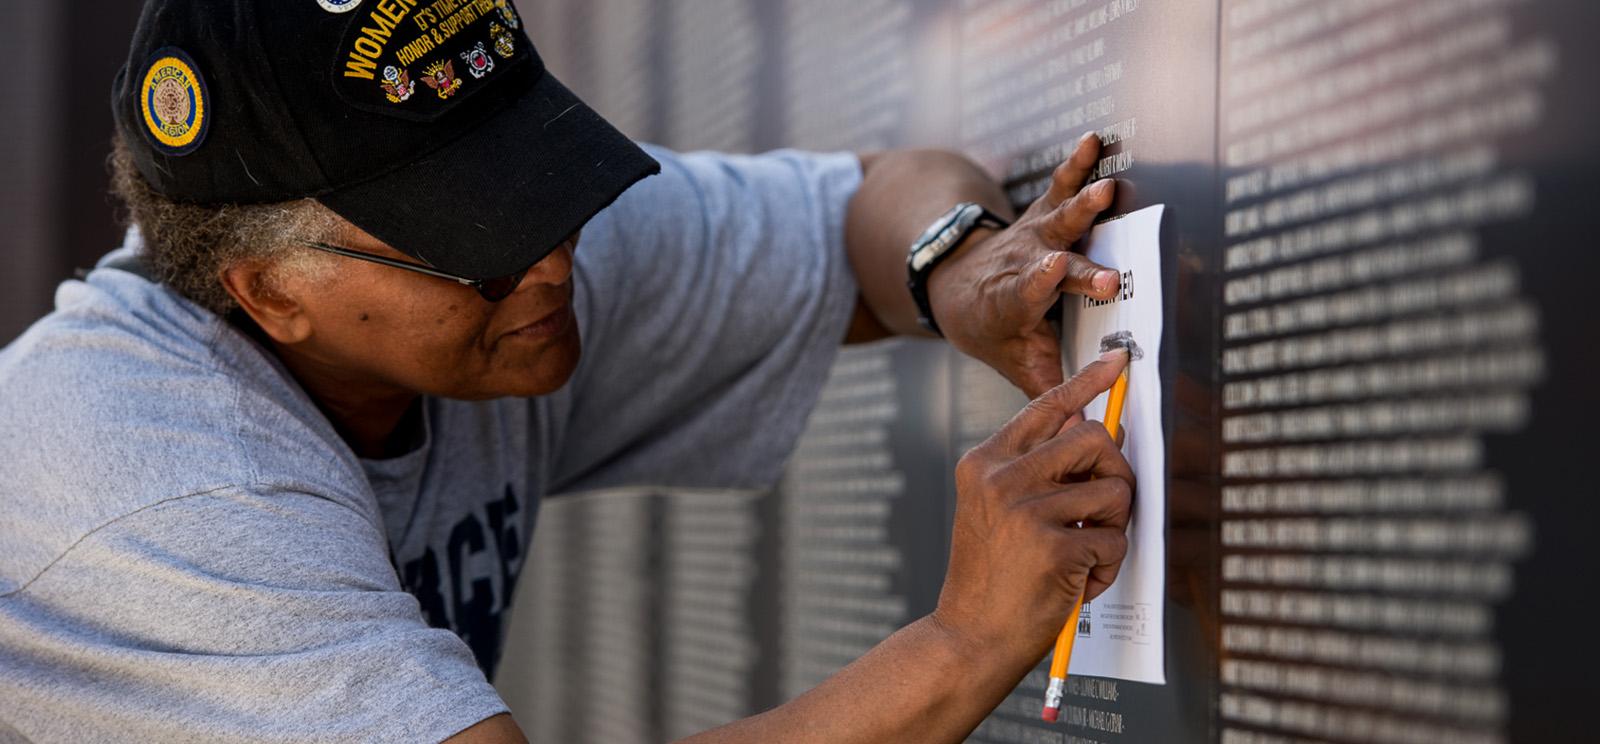 An older Black woman wearing a Woman Veterans baseball cap holds a piece of paper to the etched names on a black wall and creates a rubbing with a pencil.